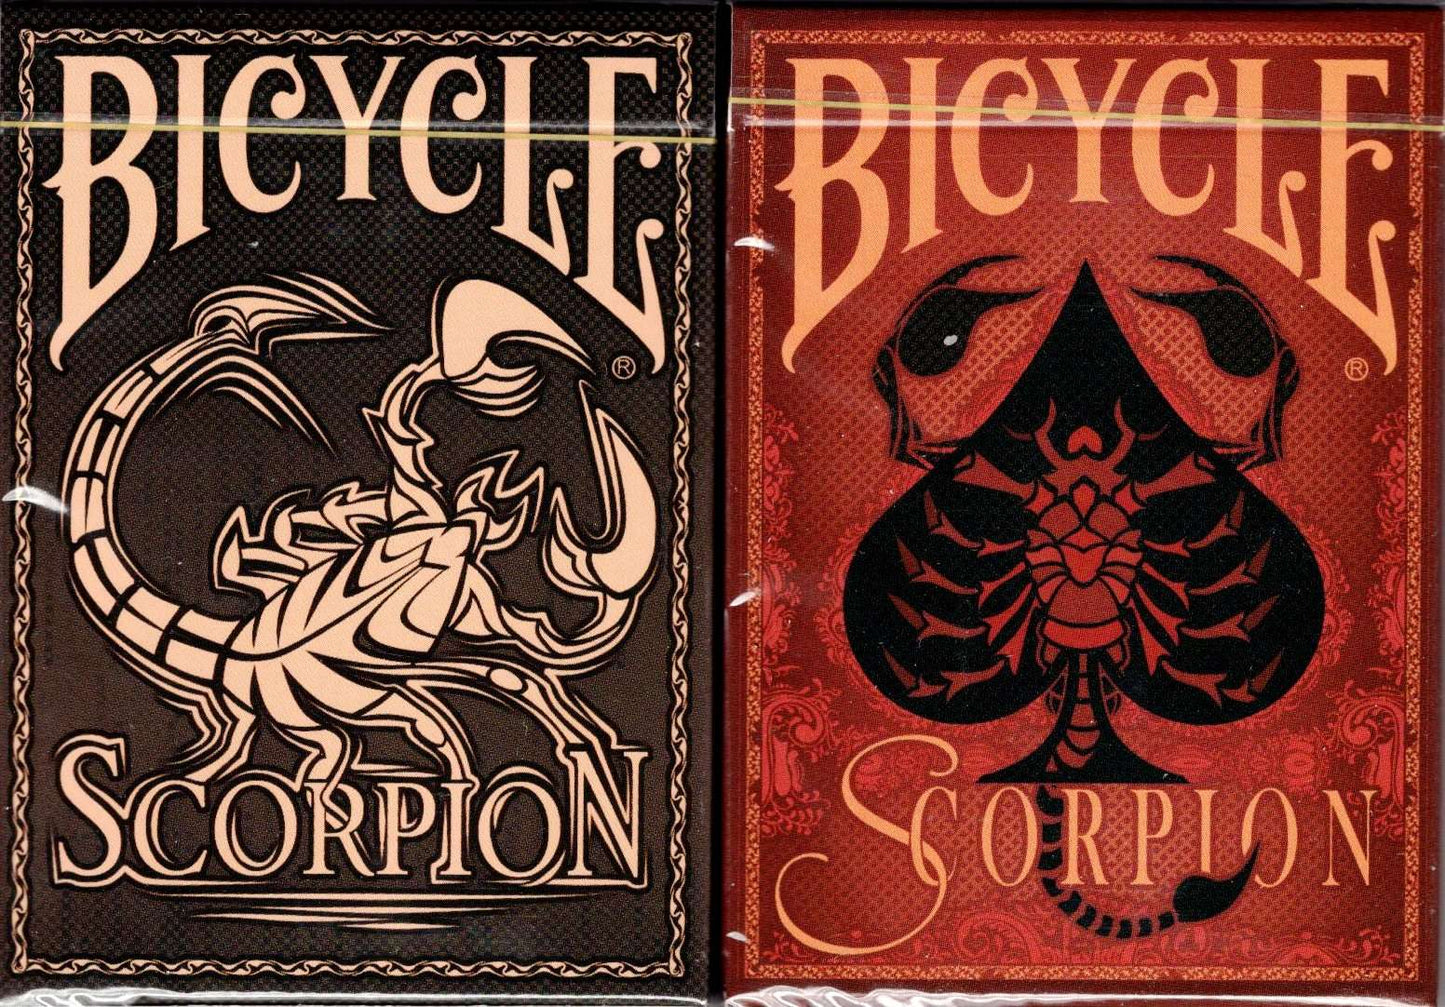 PlayingCardDecks.com-Scorpion Gilded Bicycle Playing Cards: 2 Deck Set